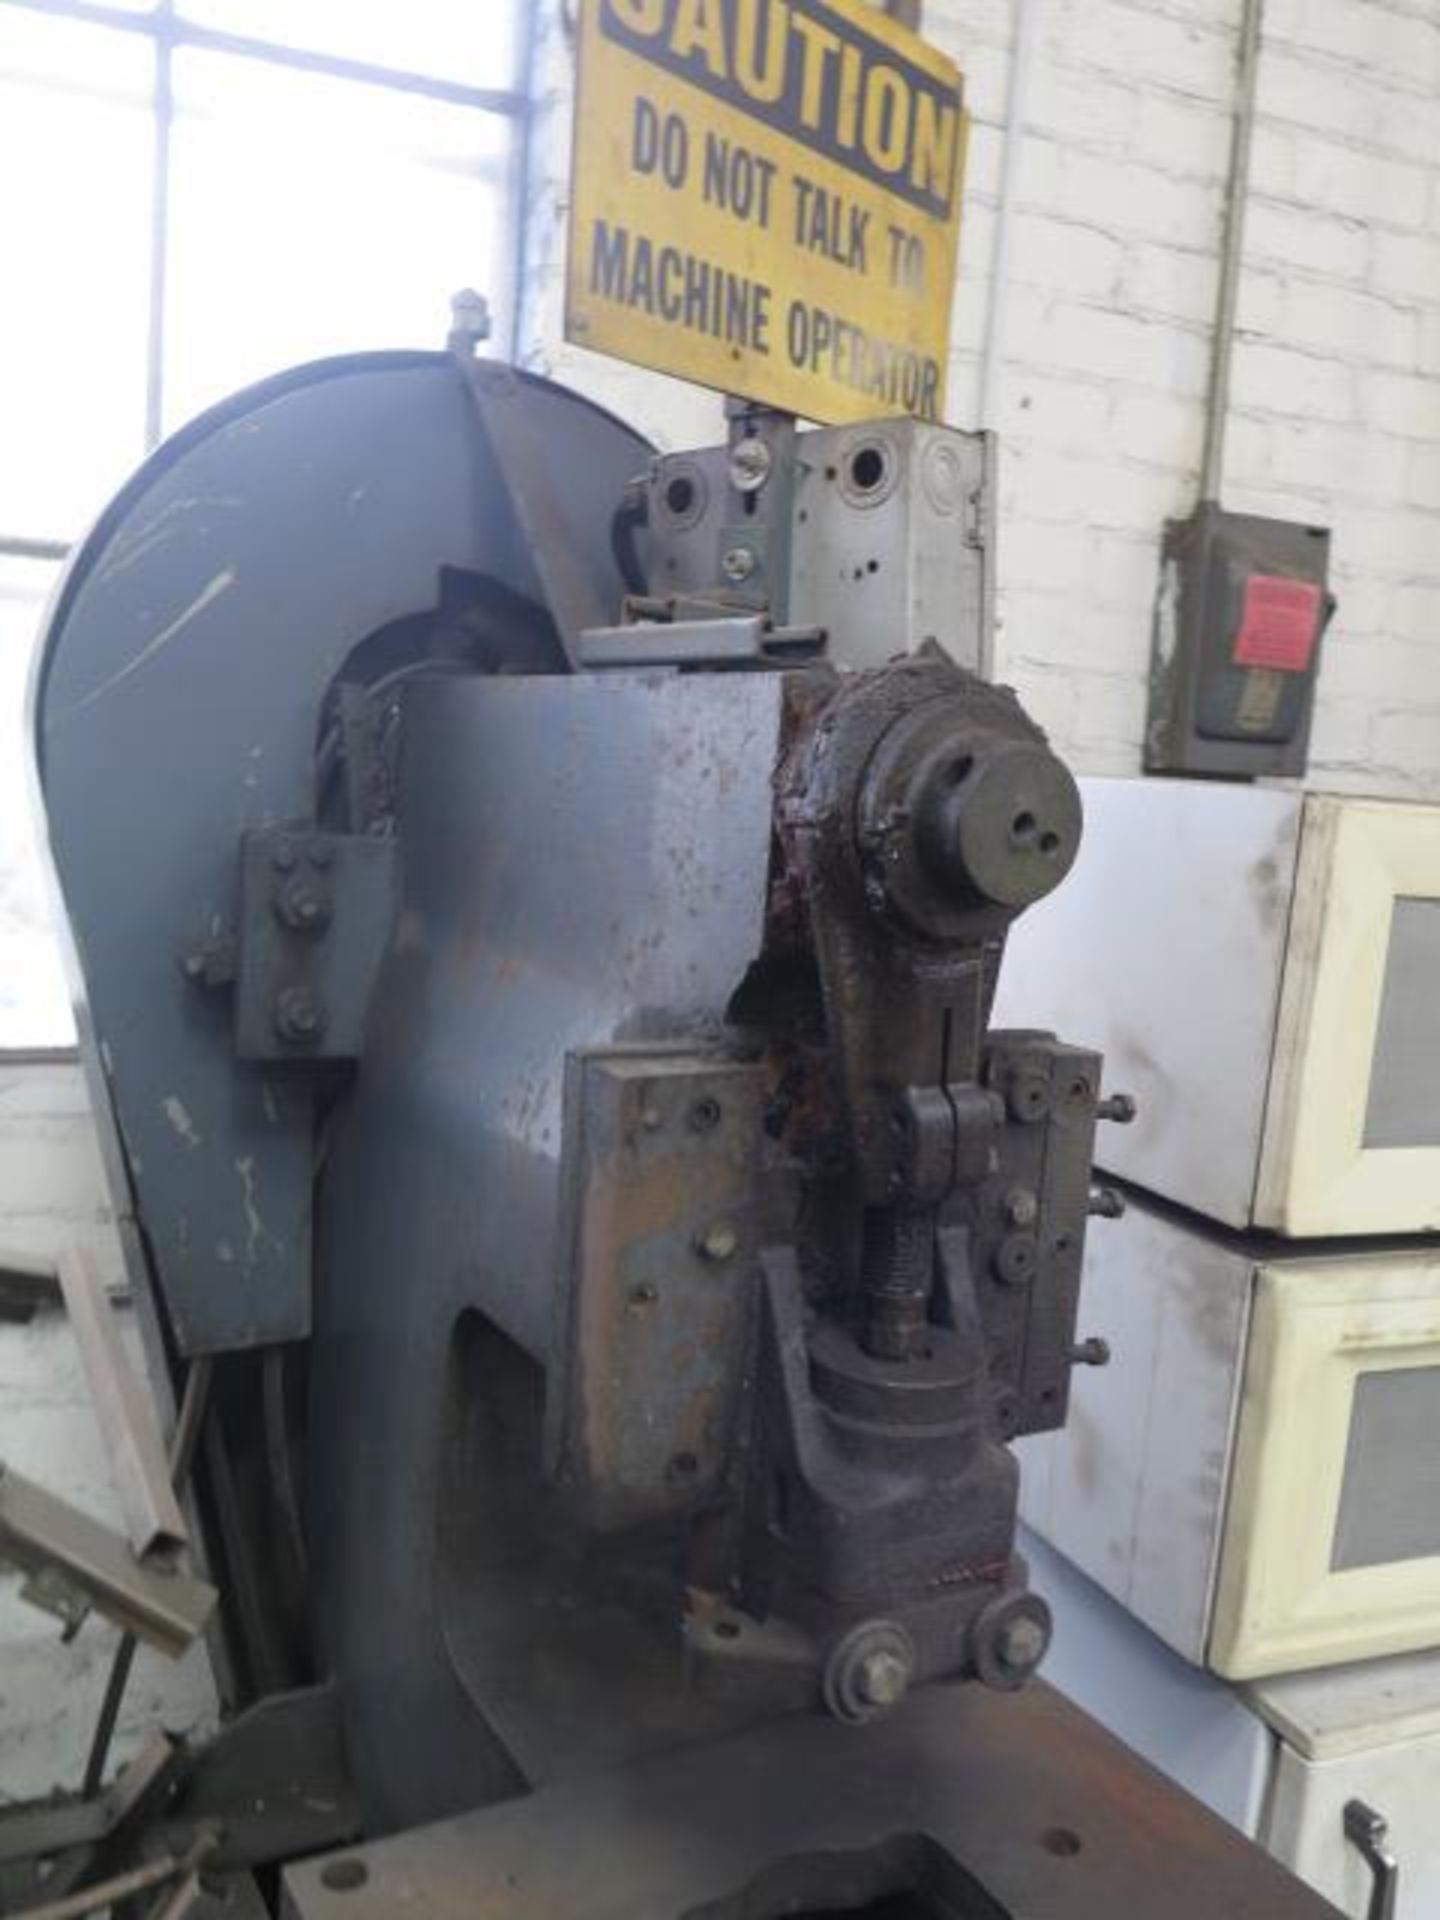 Whitney-Jensen mdl. 129 C-Frame Press s/n 1100-8-68 (FOR PARTS ONLY) SOLD AS IS NO WARRANTY - Image 2 of 4